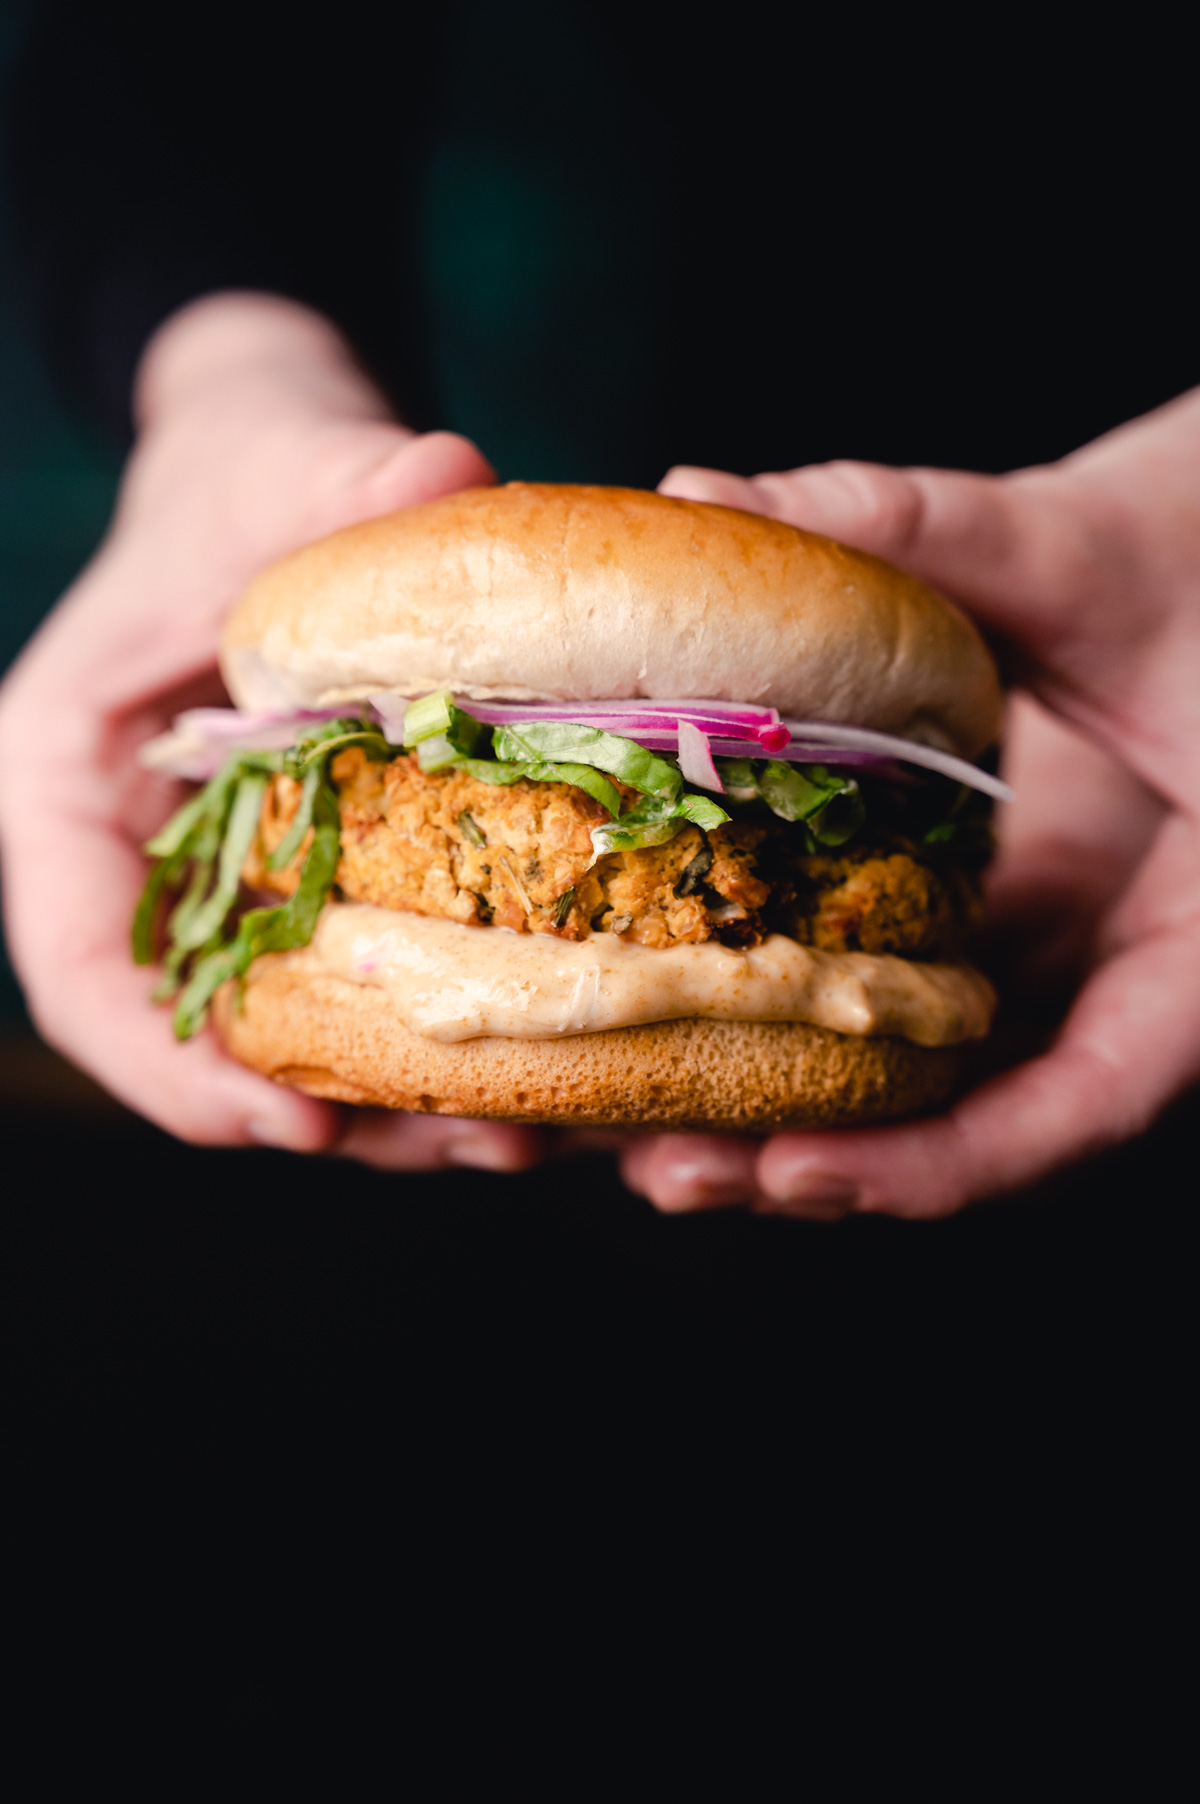 Hands holding a crispy chicken sandwich with lettuce, red onions, and a light sauce on a bun.